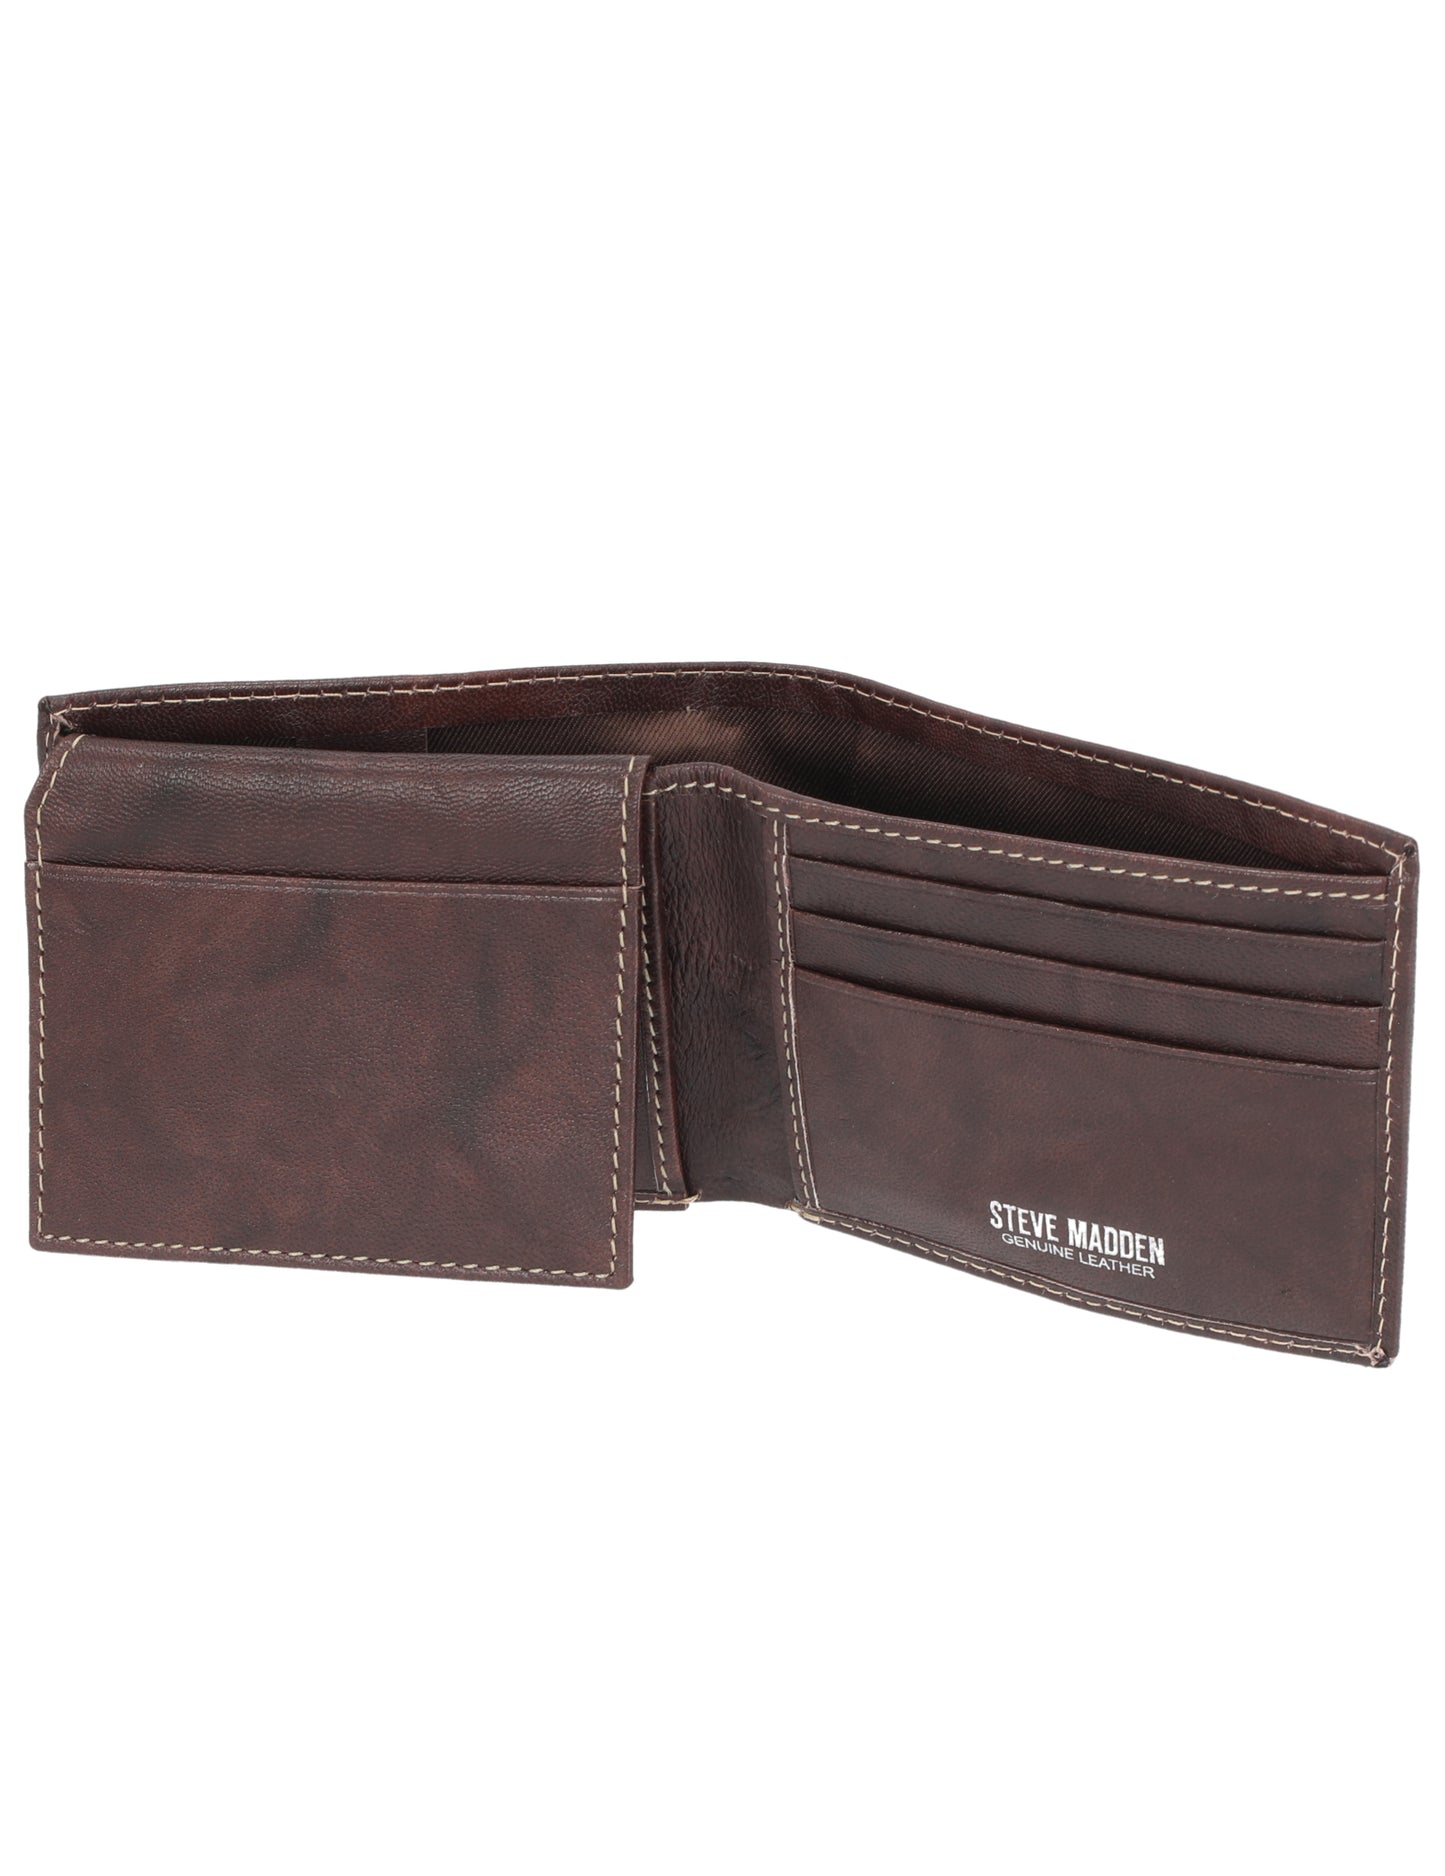 Brown wallet with 8 card slots, 1 mesh slot for your ID, and 1 large billfold compartment and RFID blocking technology